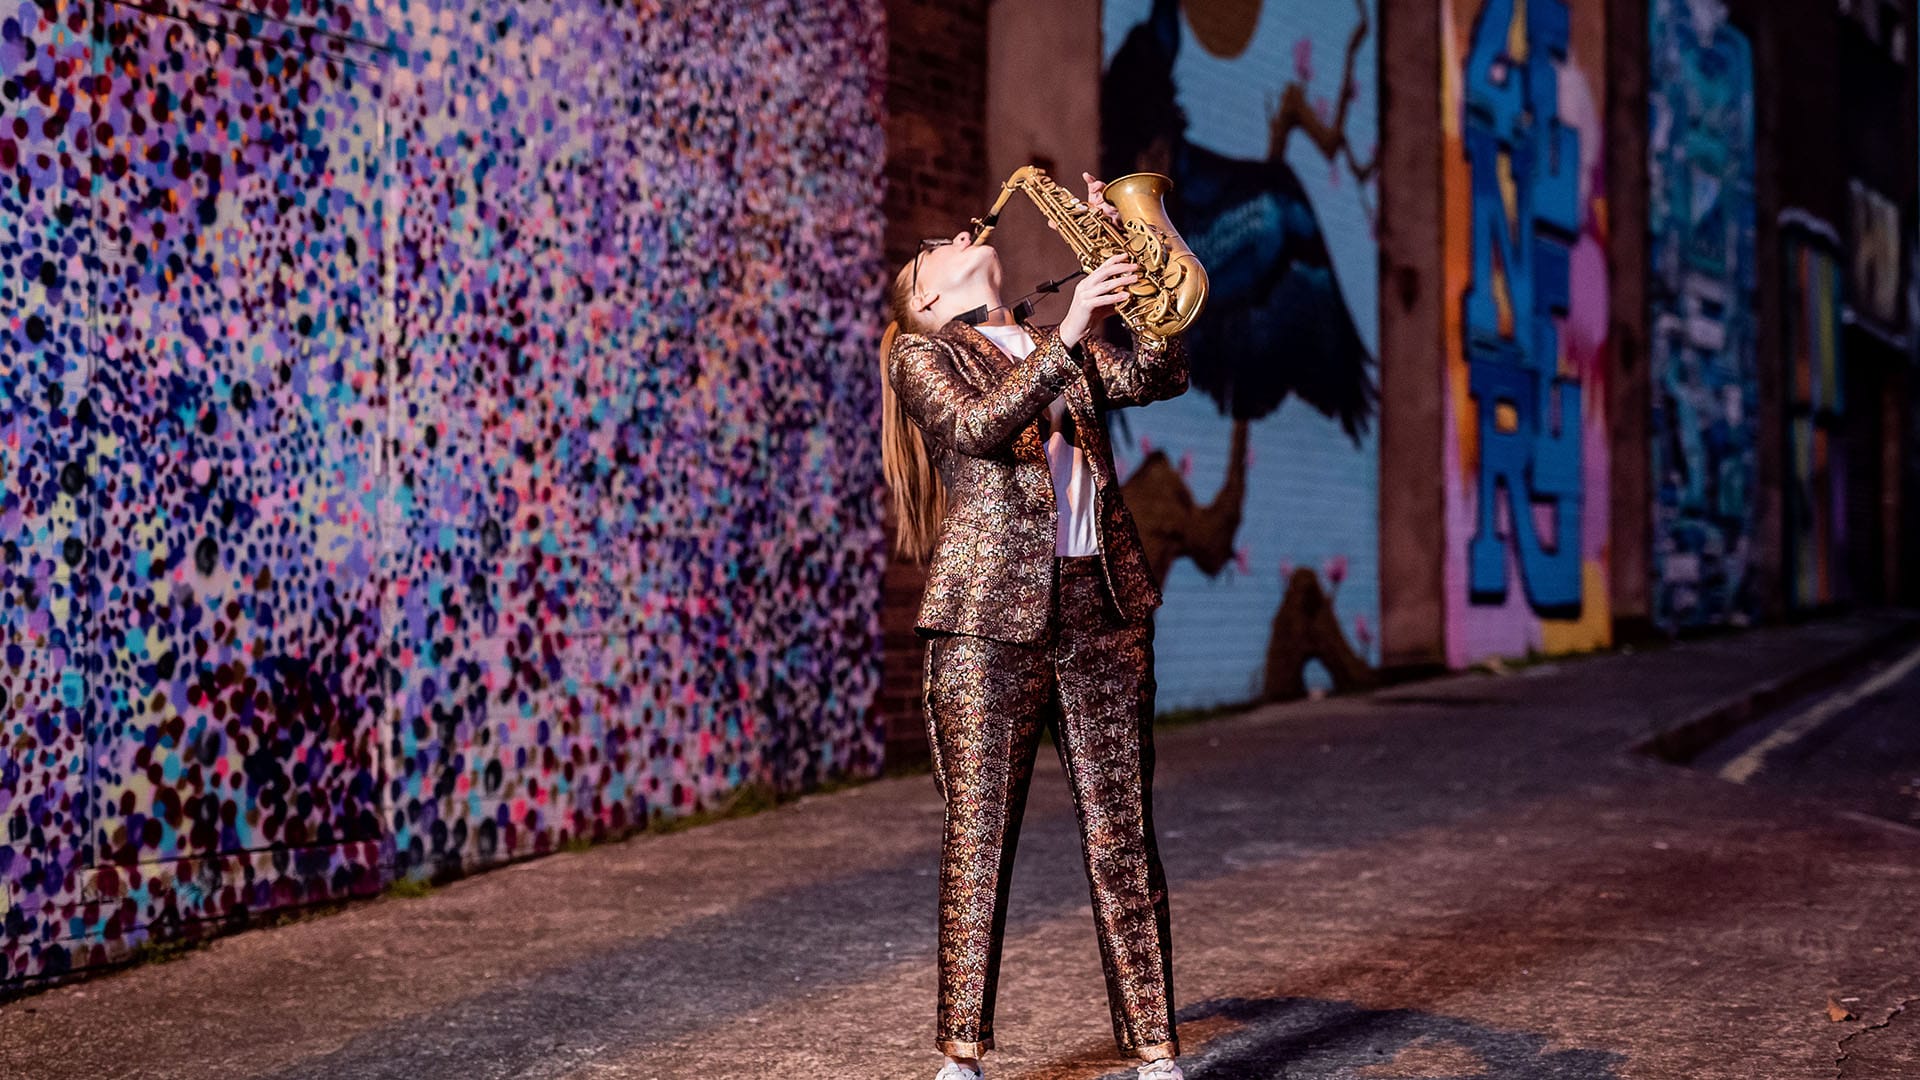 Saxophonist Jess Gillam stood outside, playing a saxophone, wearing a shiny colourful suit, with a long straight blonde ponytail.